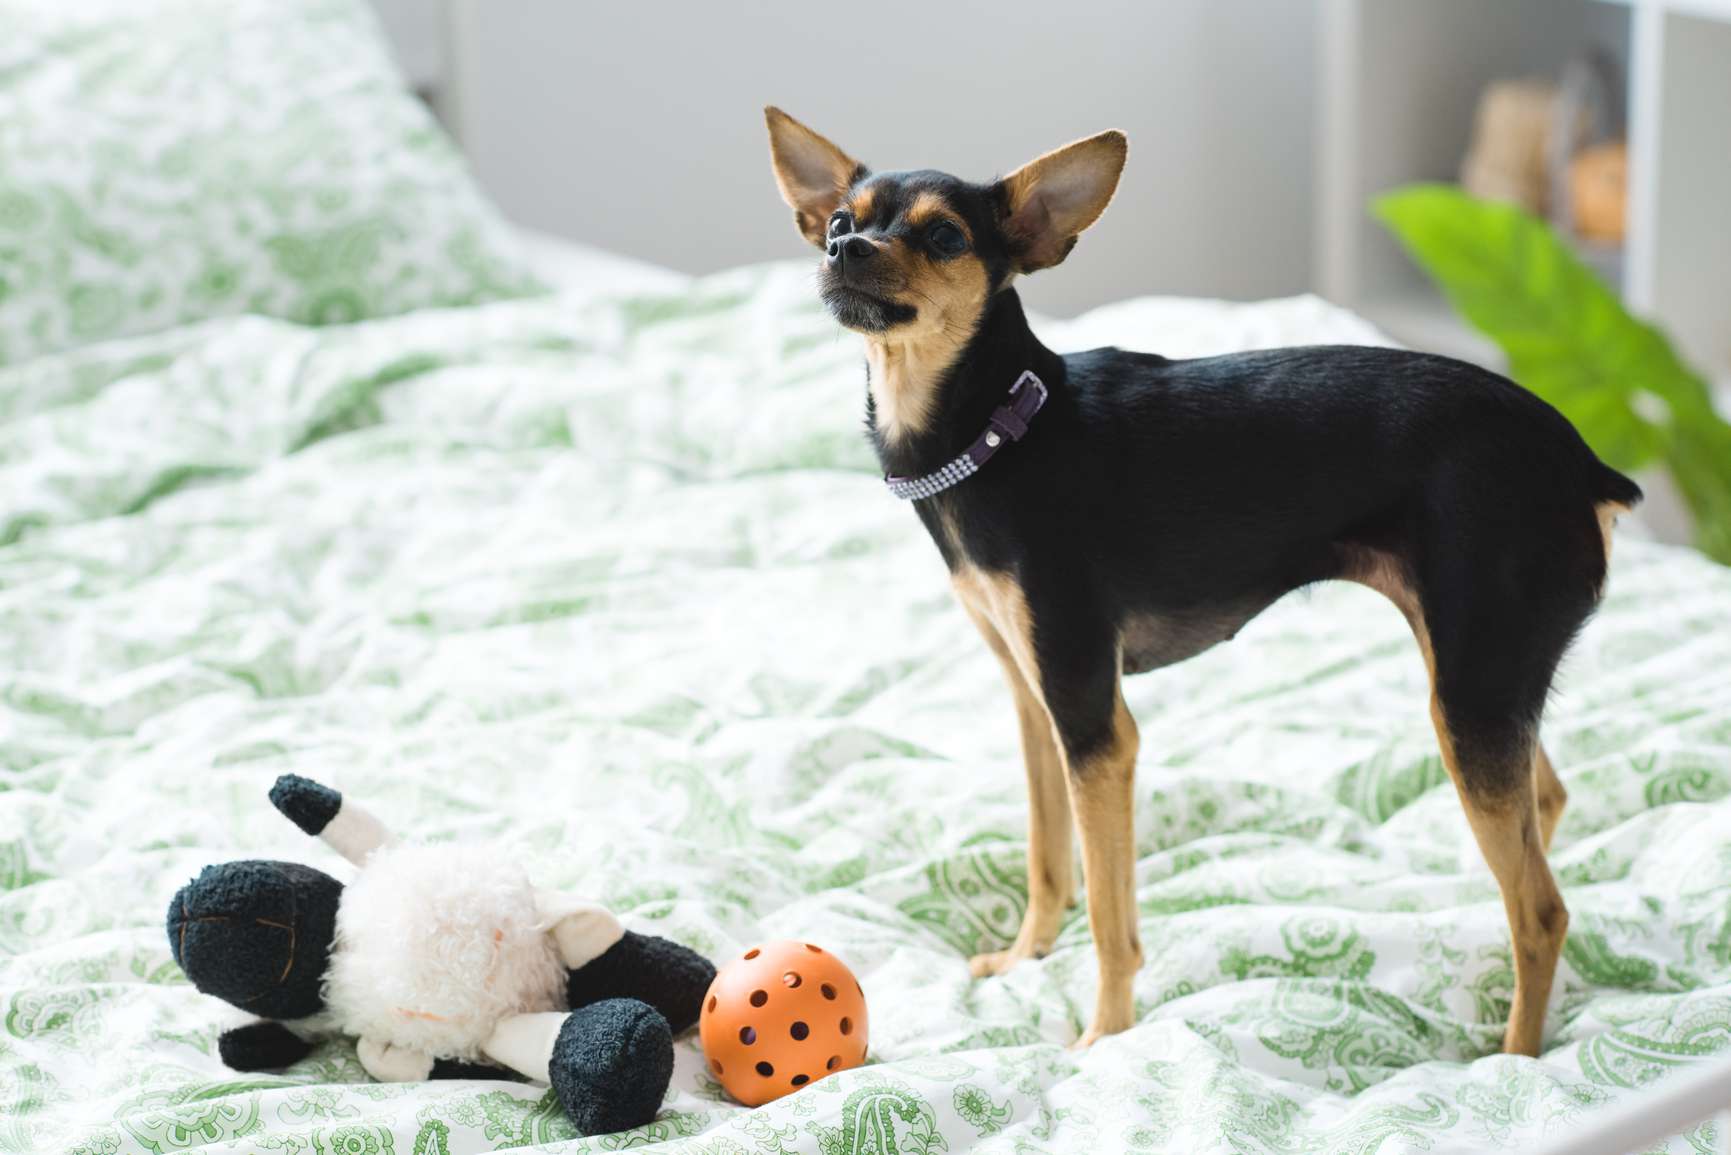 A Miniature Pinscher on a bed with toys